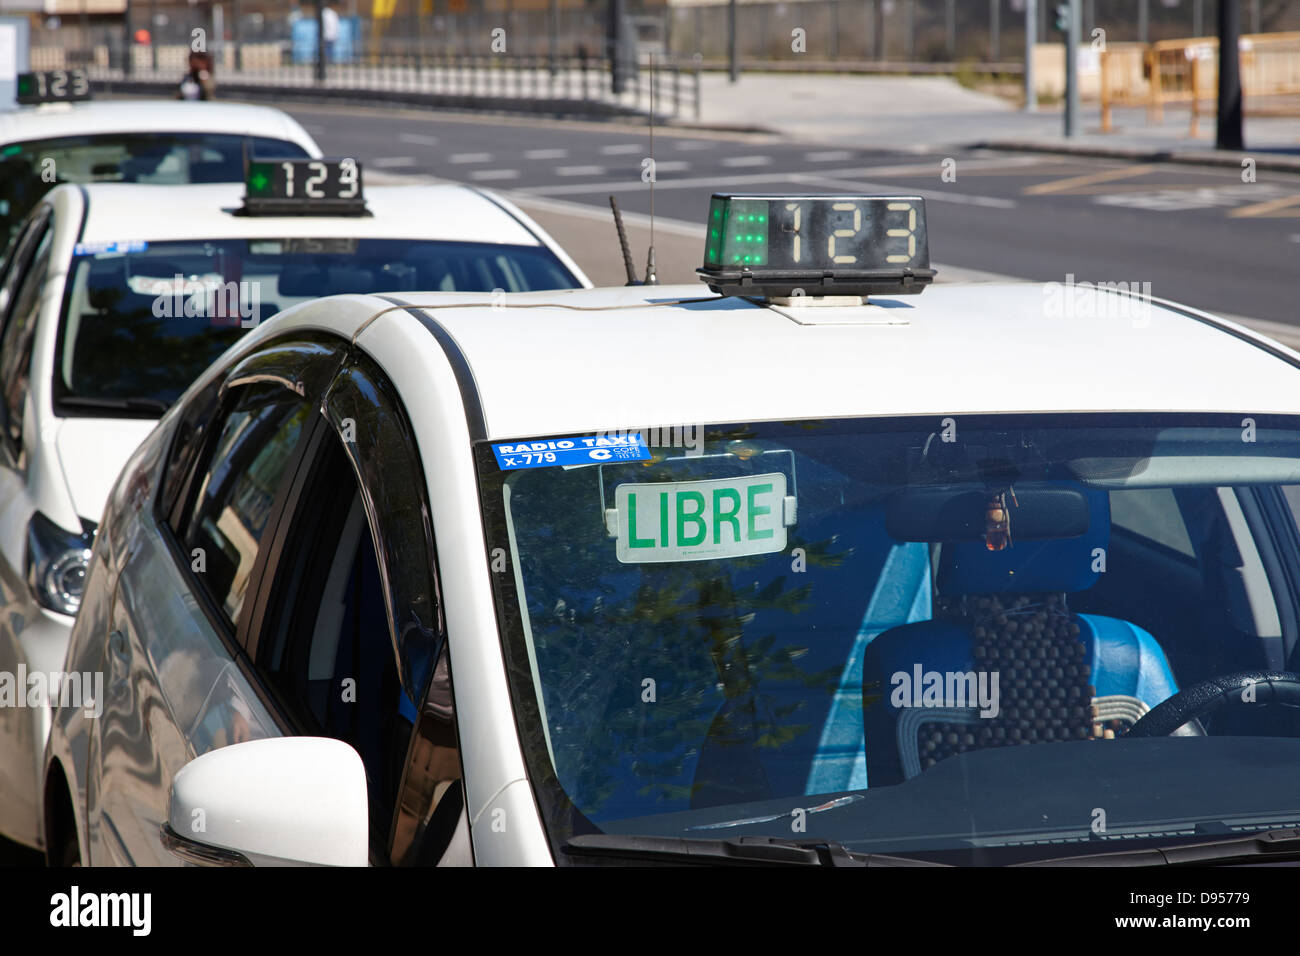 row of hybrid vehicle taxi cabs on a rank in valencia spain Stock Photo